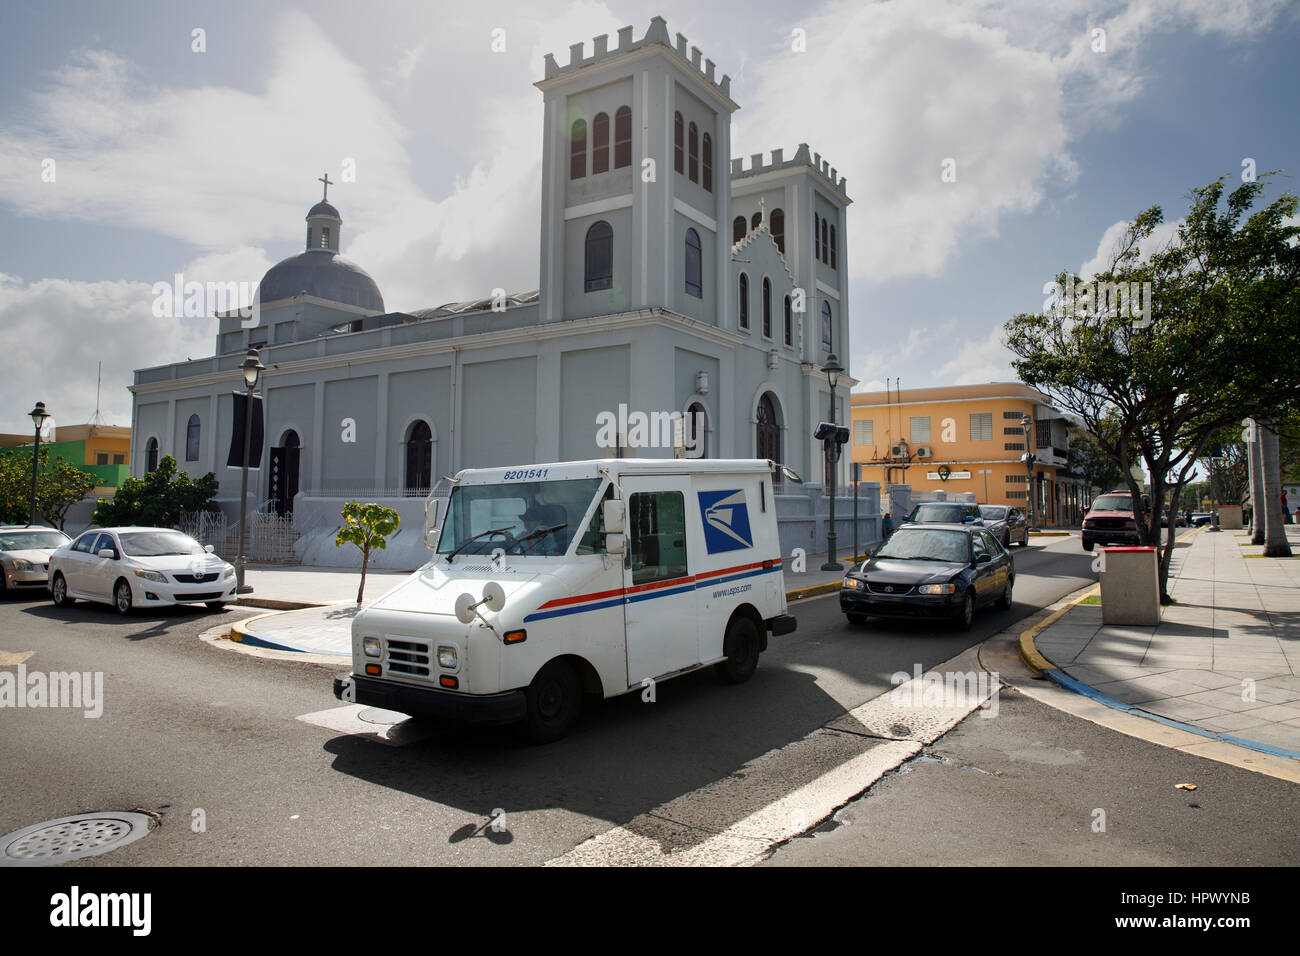 United States U.S. mail truck, Isabela, Puerto Rico Banque D'Images